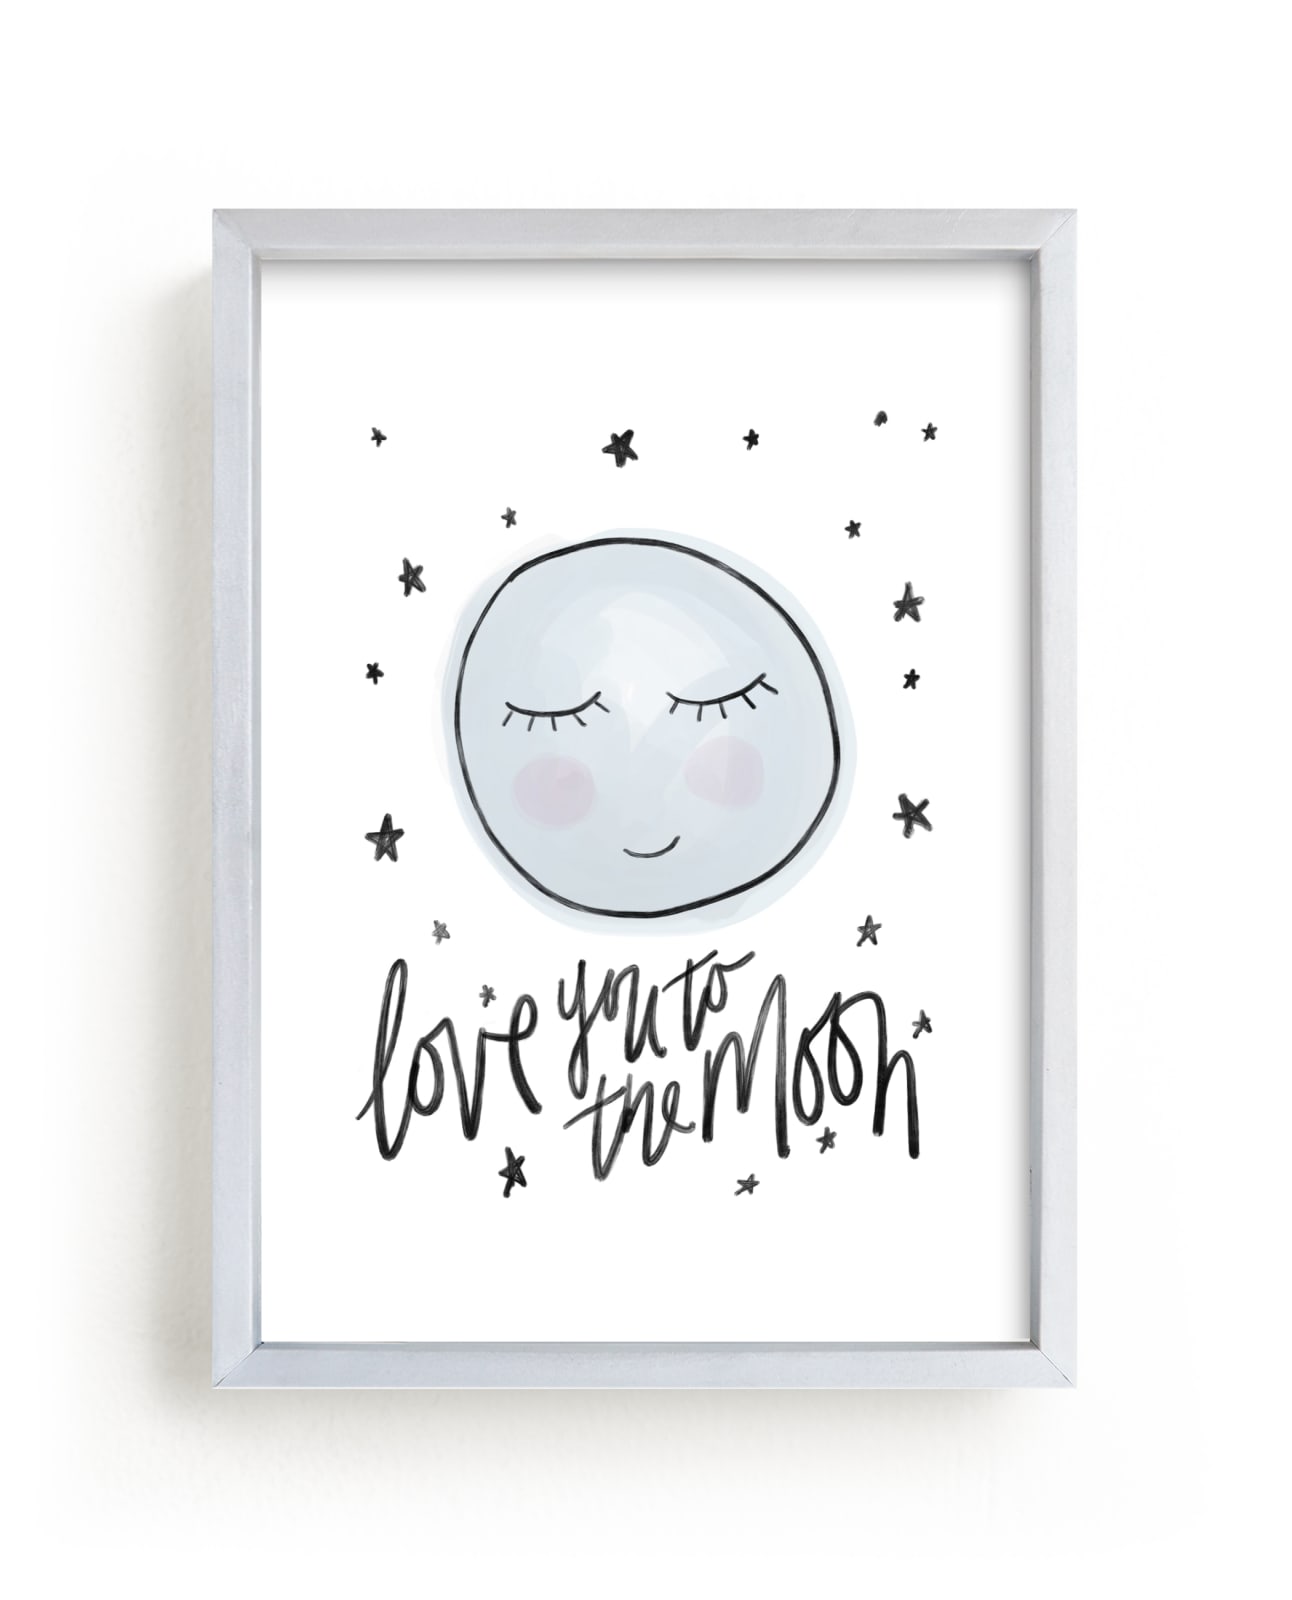 "A Sweet Moon" by Korrin Dougherty in beautiful frame options and a variety of sizes.